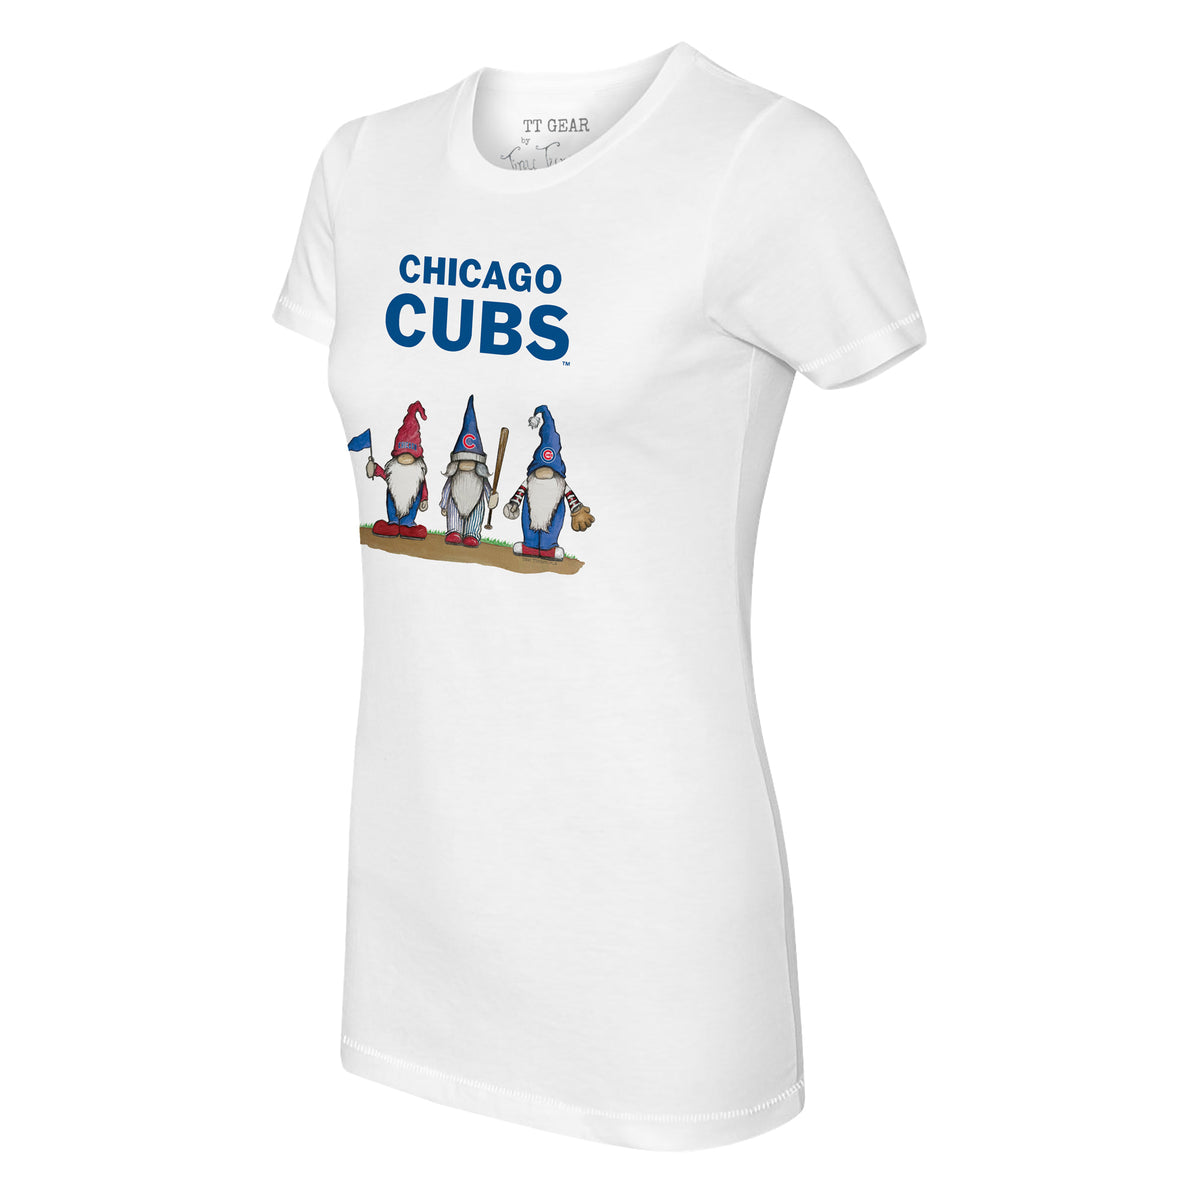 Chicago Cubs Gnomes Tee Shirt